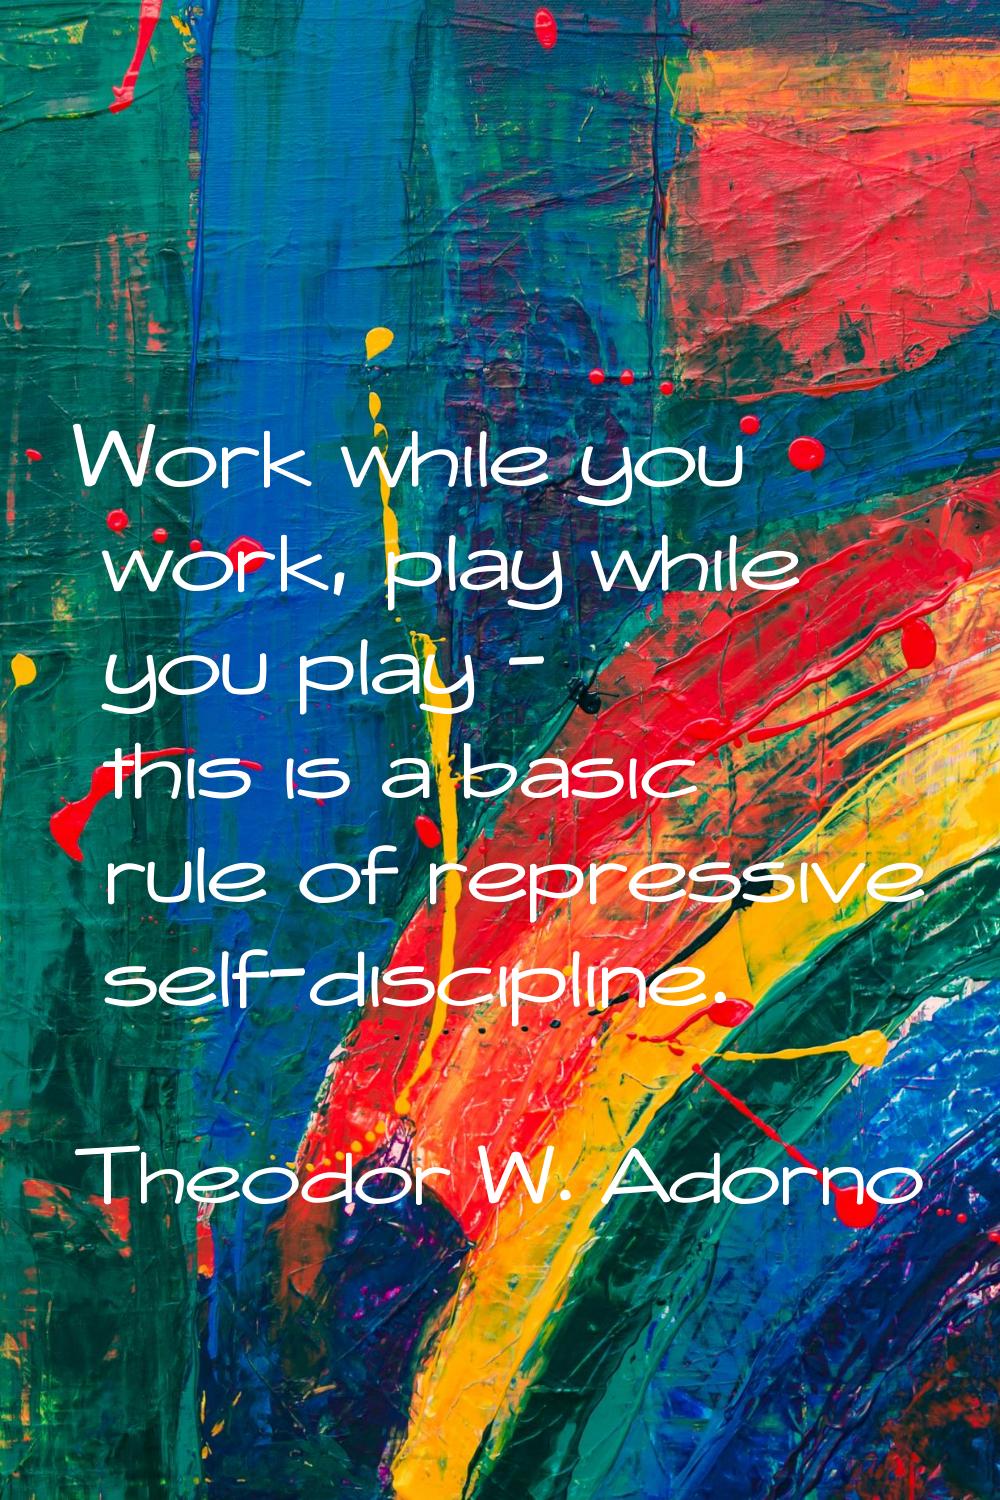 Work while you work, play while you play - this is a basic rule of repressive self-discipline.